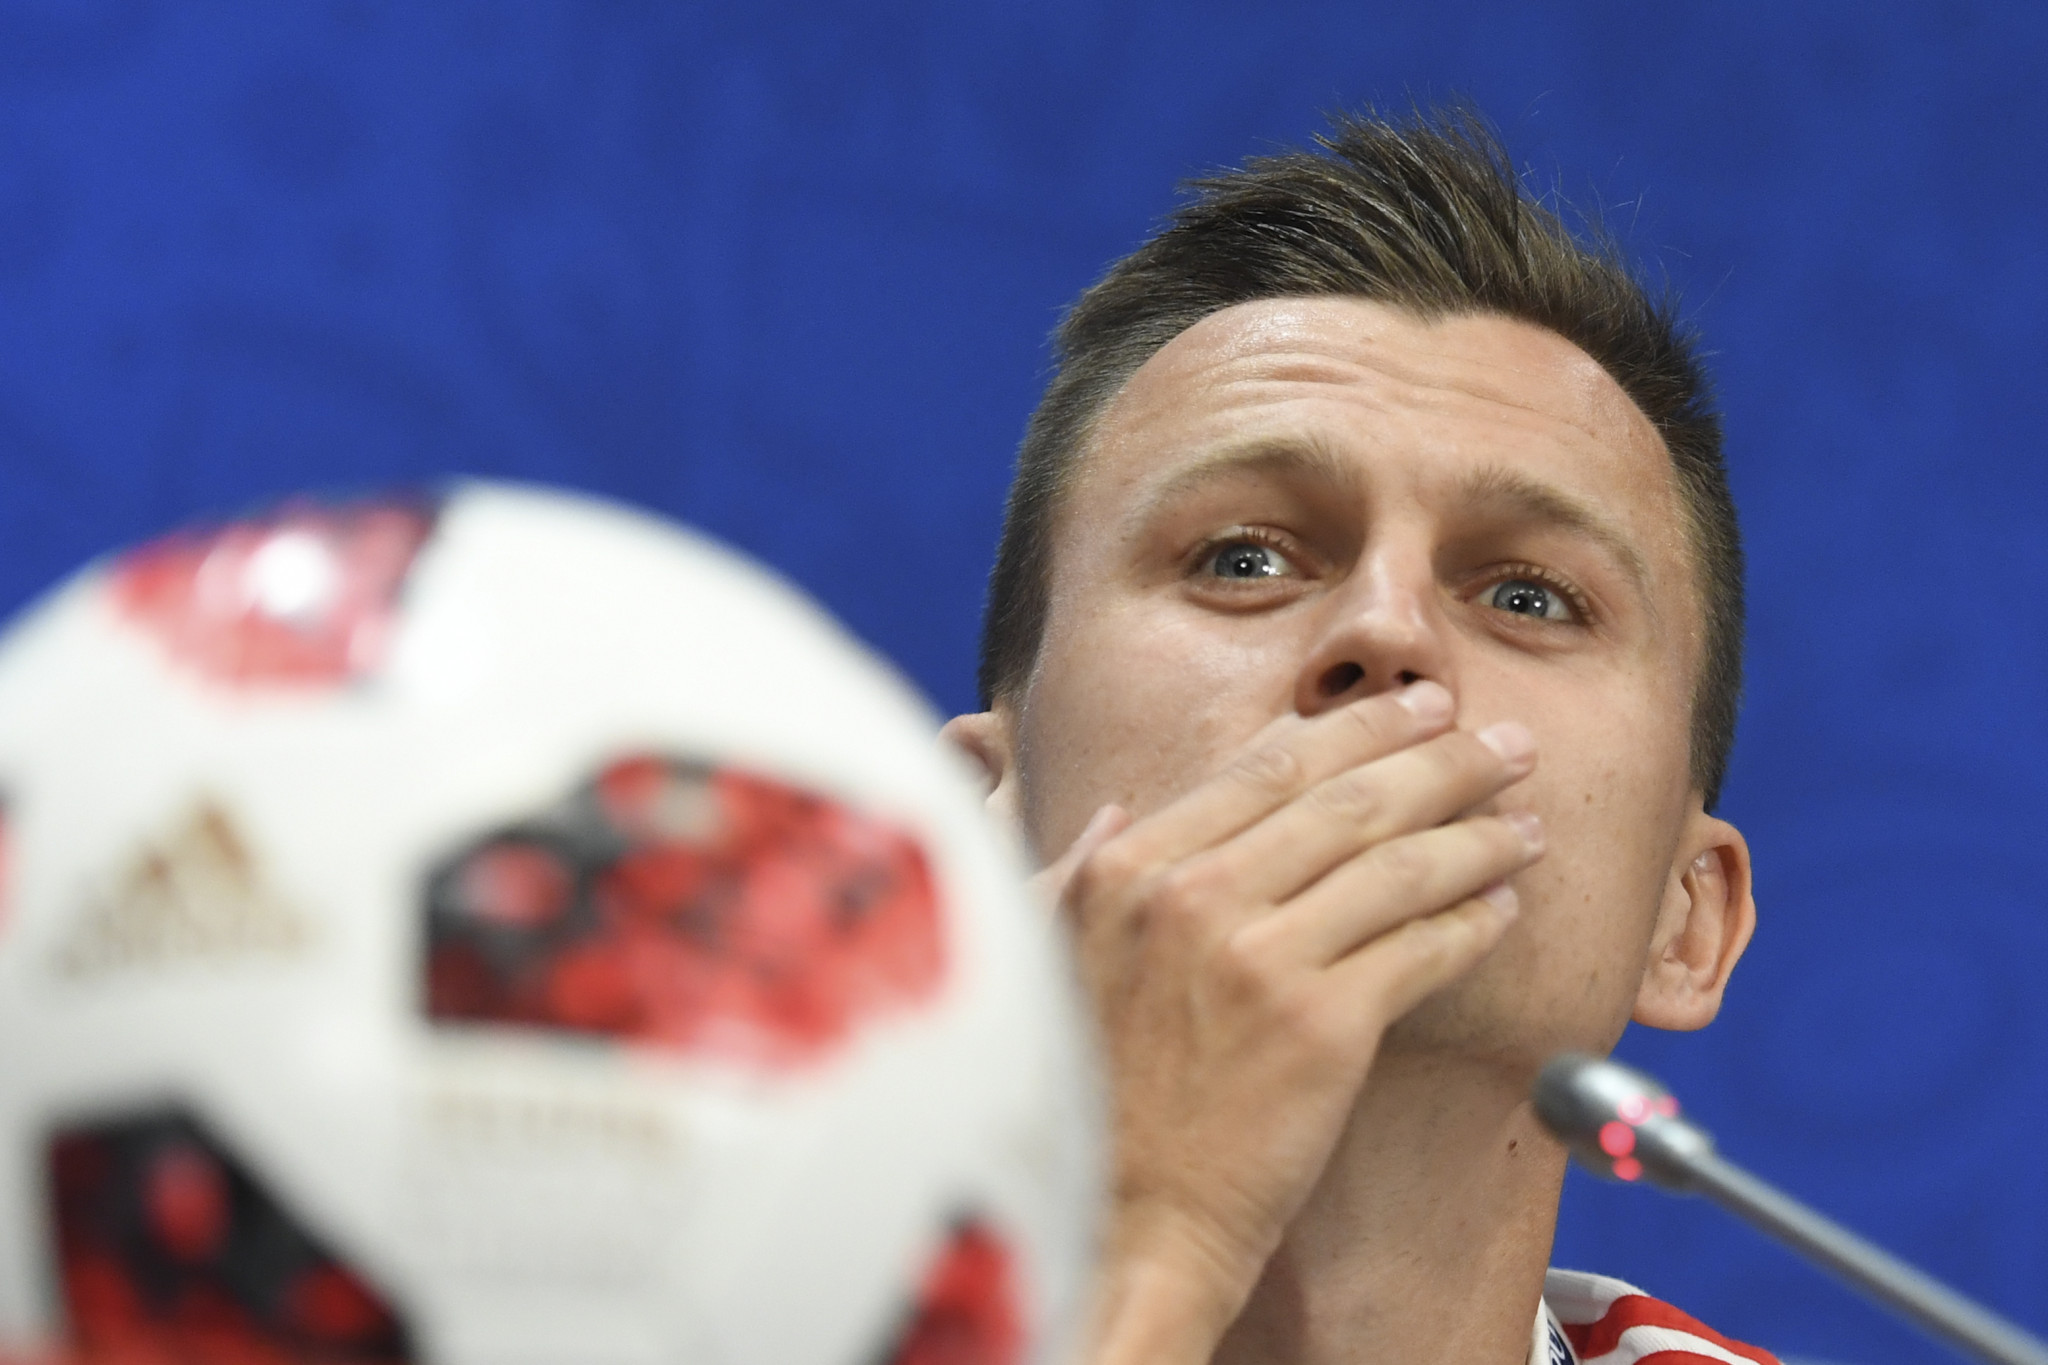 World Cup star Cheryshev denies doping after father says he was injected with growth hormone